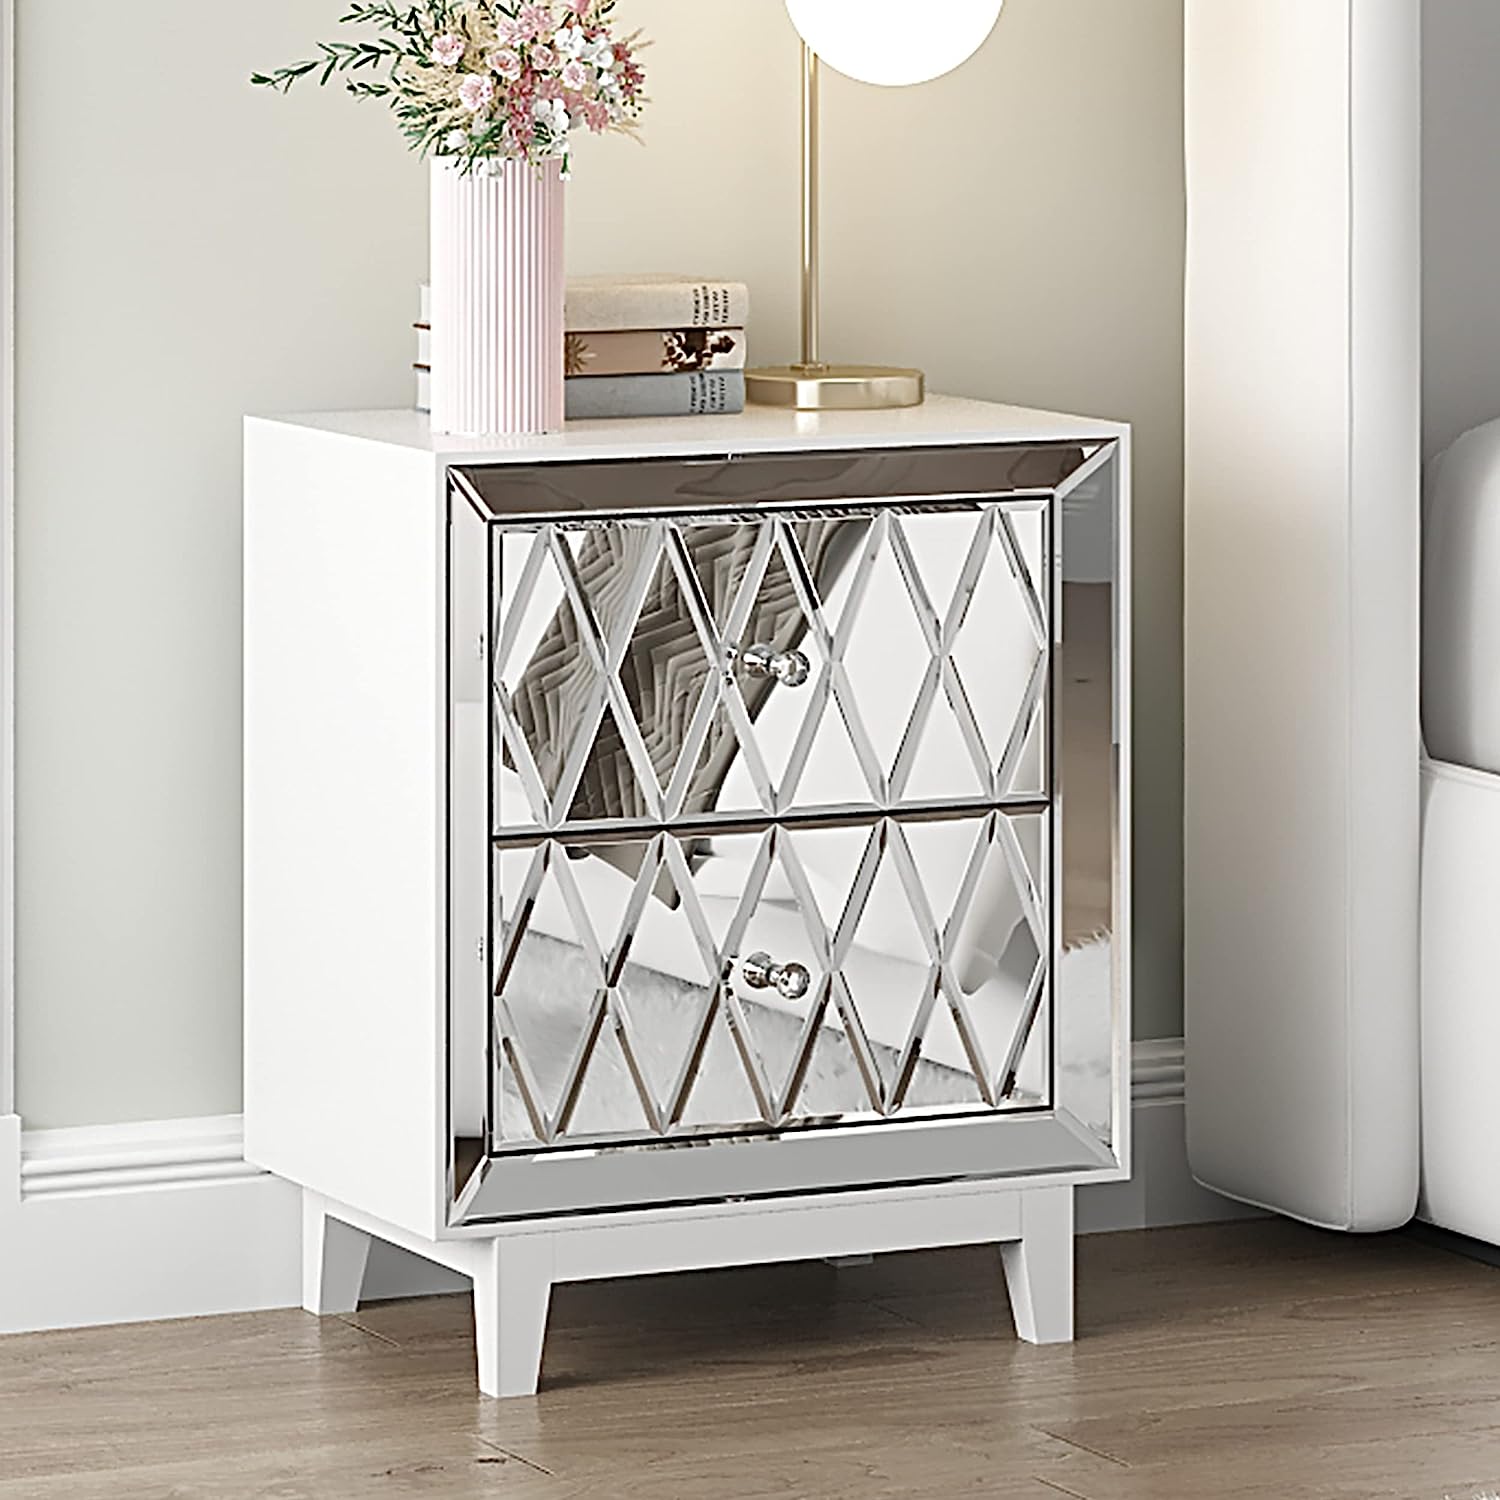 HD-23401, Mirrored side table with two drawers, silver